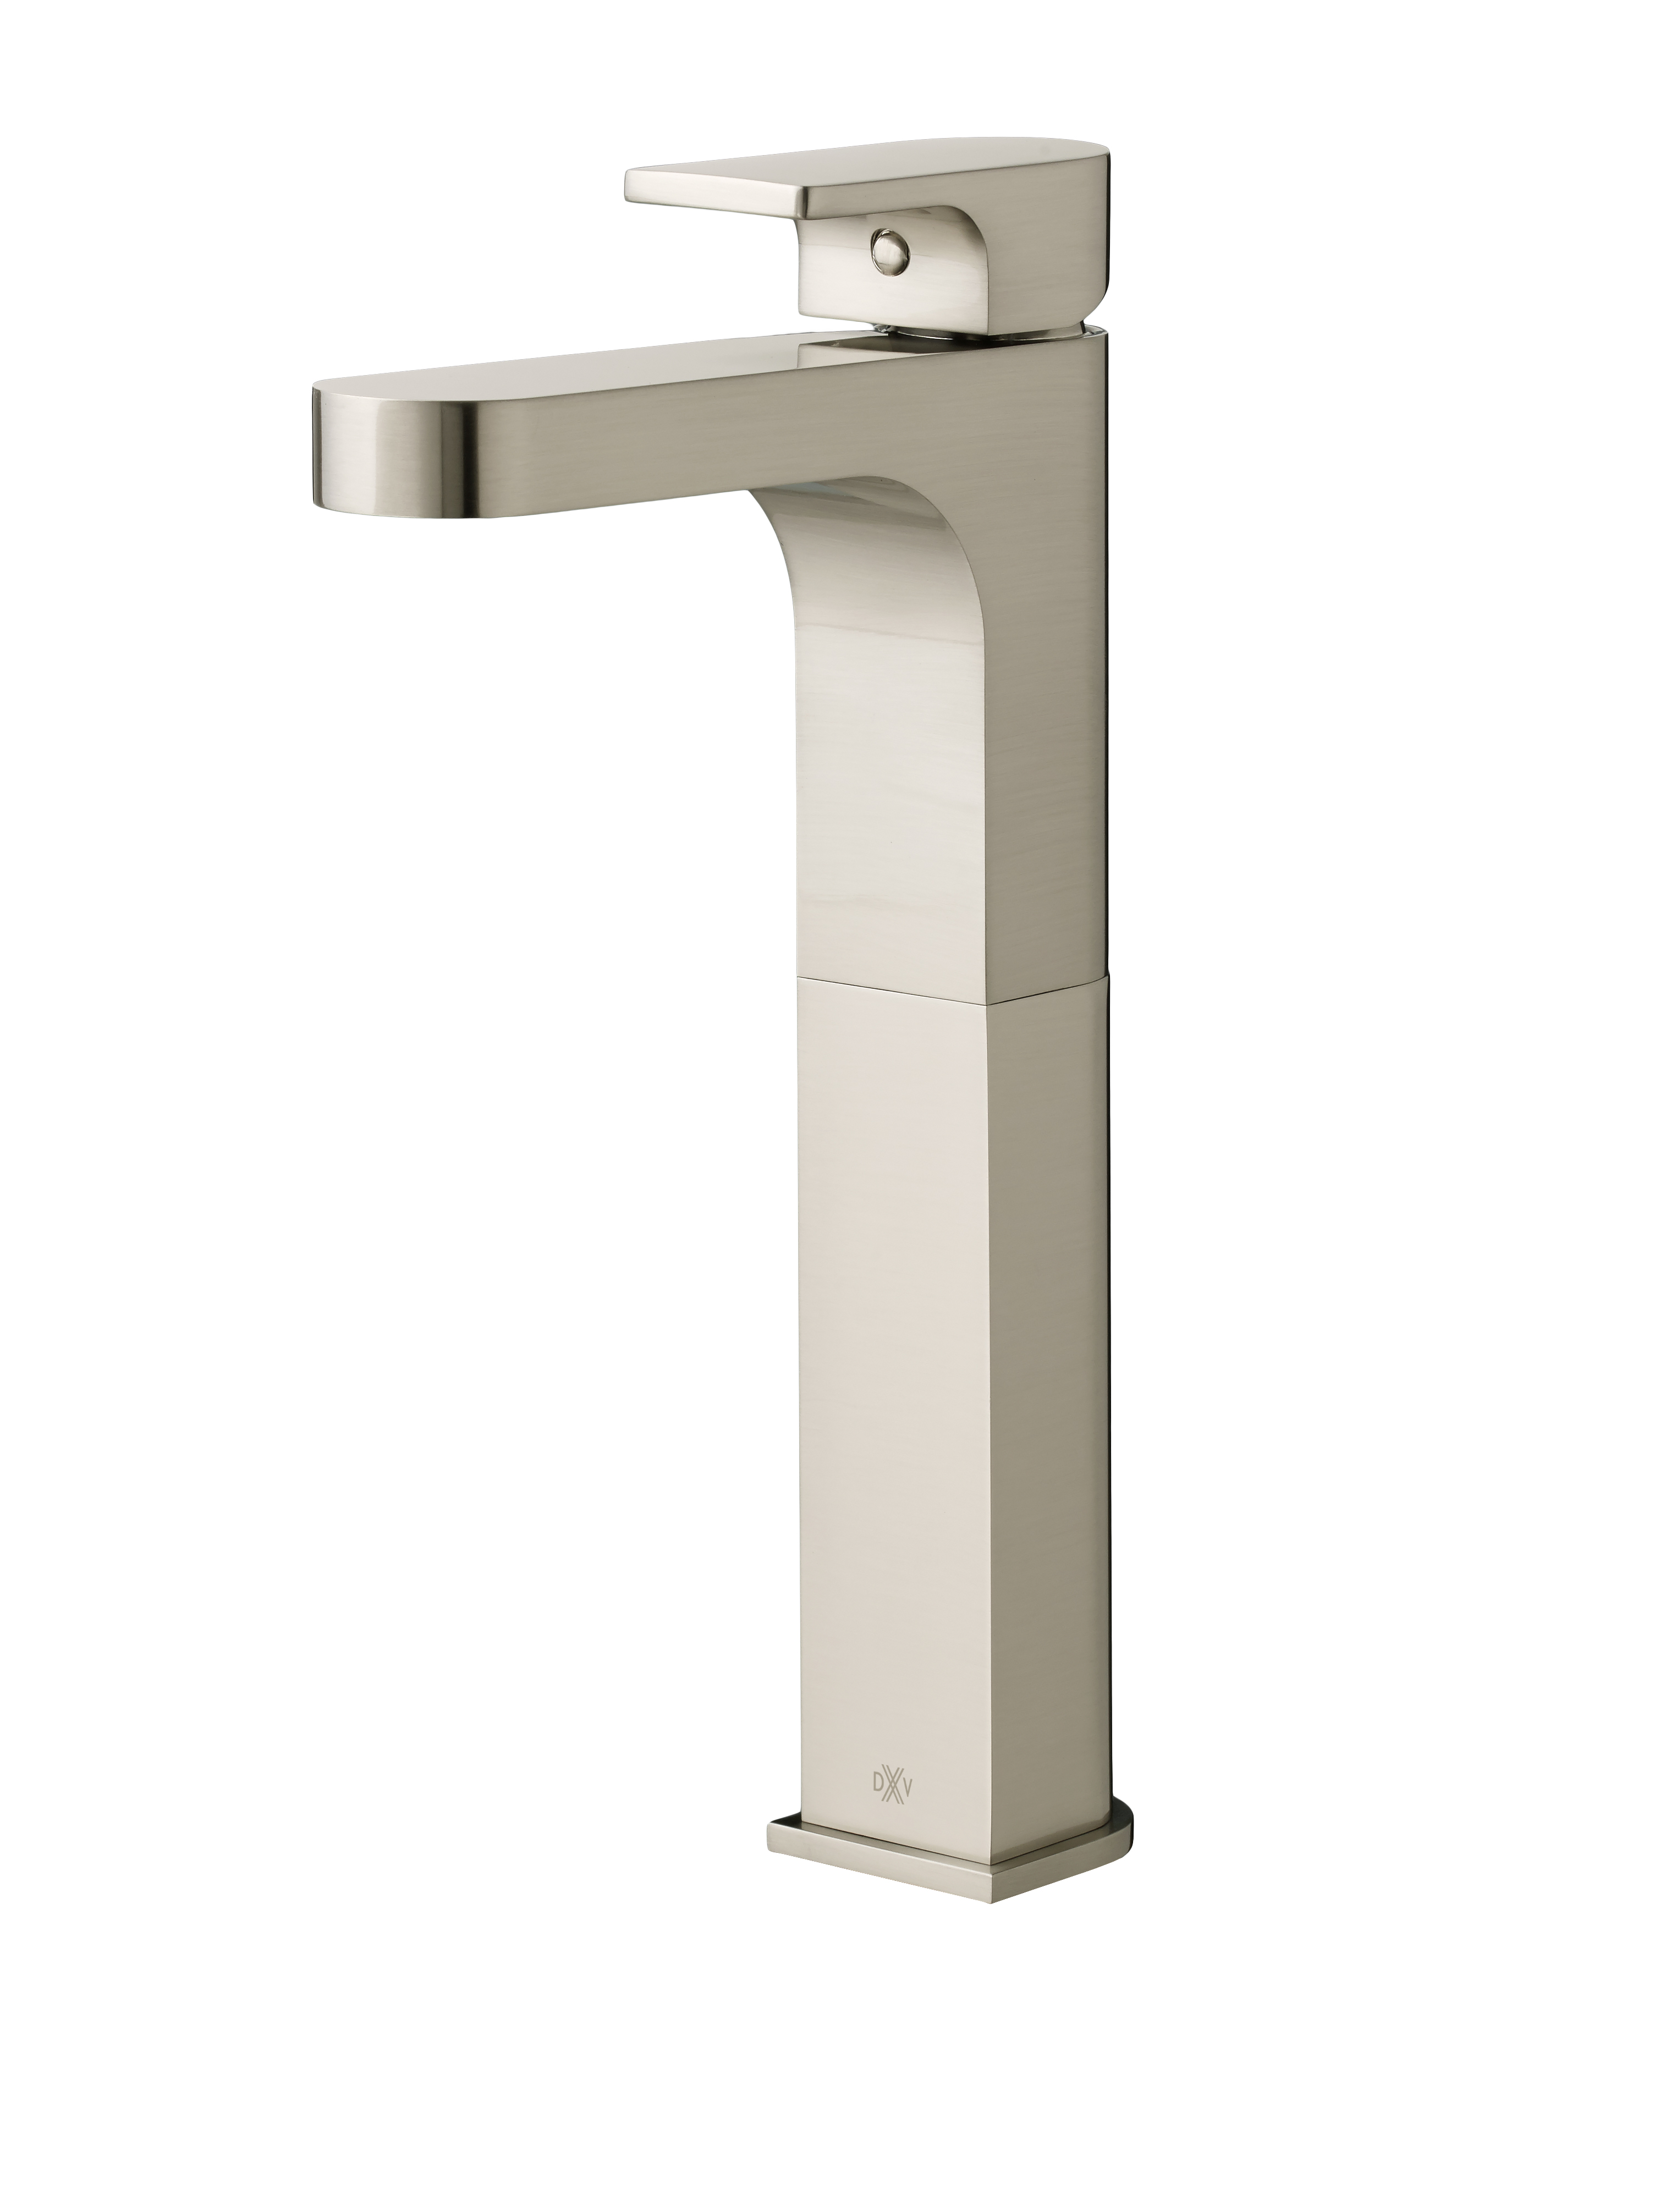 Equility Single Handle Vessel Bathroom Faucet with Lever Handle